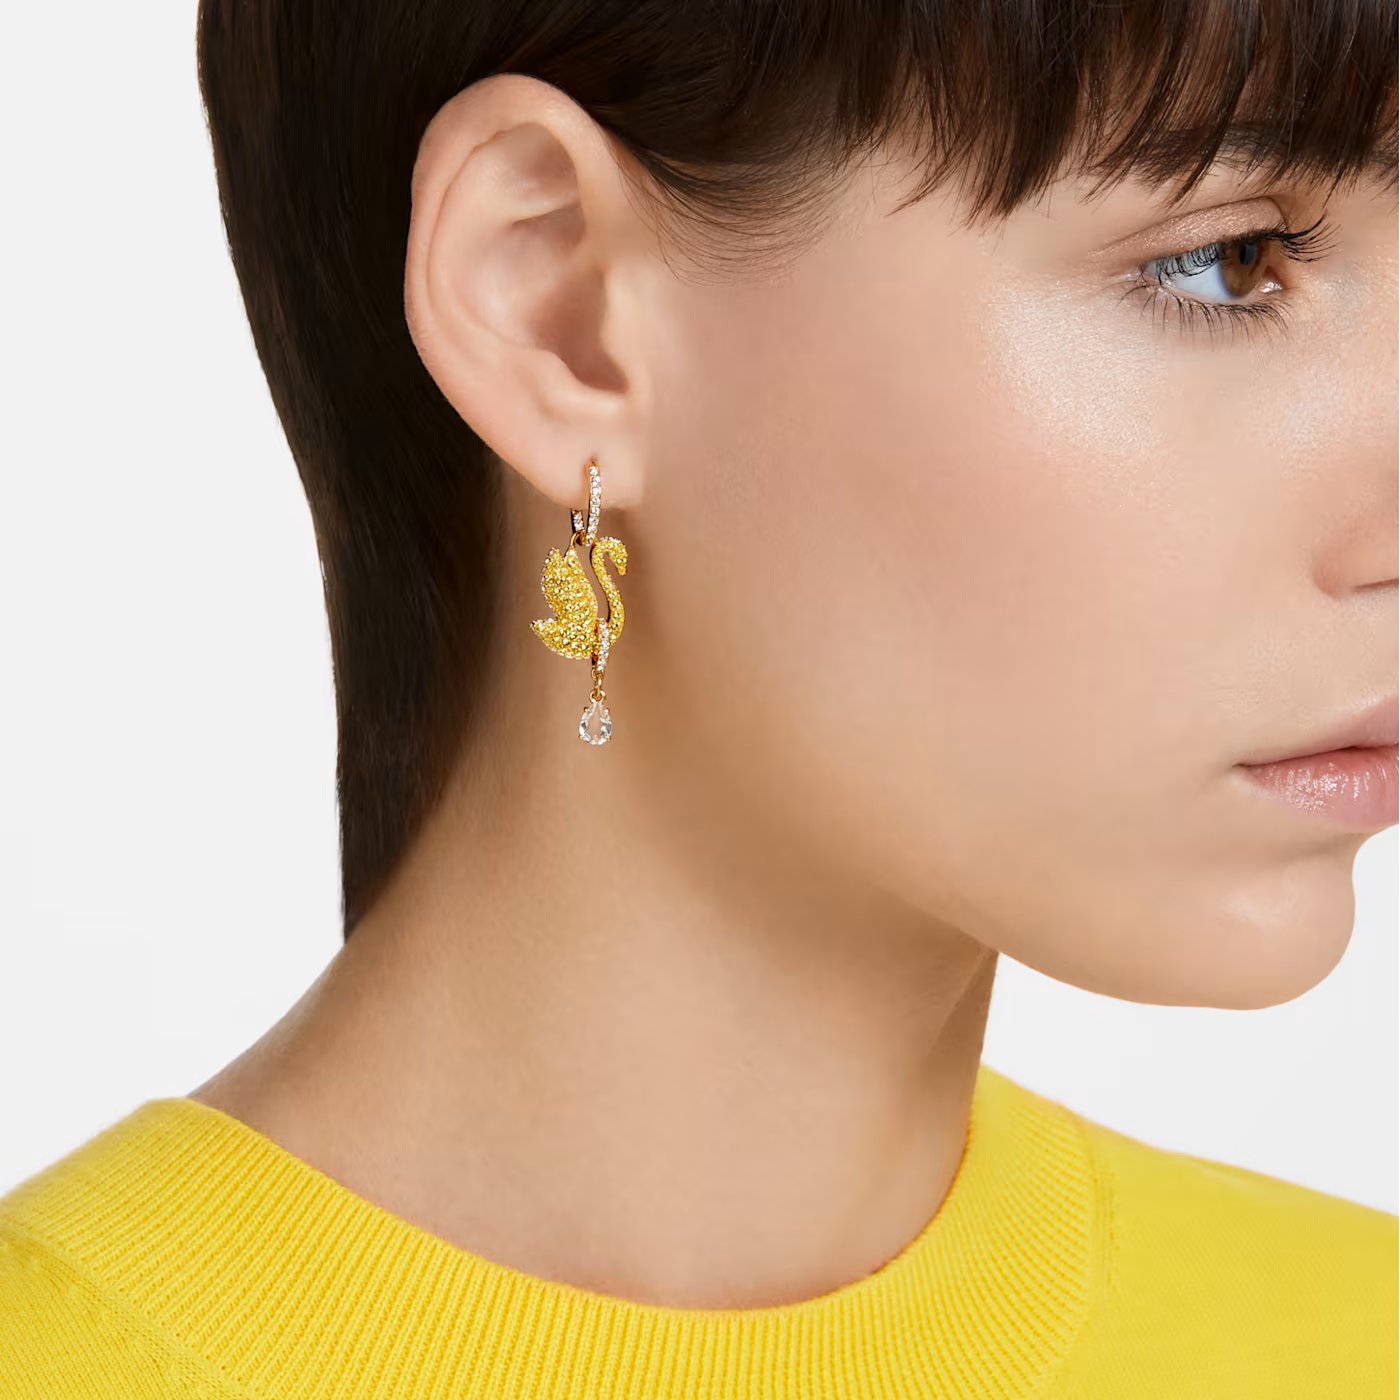 Iconic Earrings - Gold